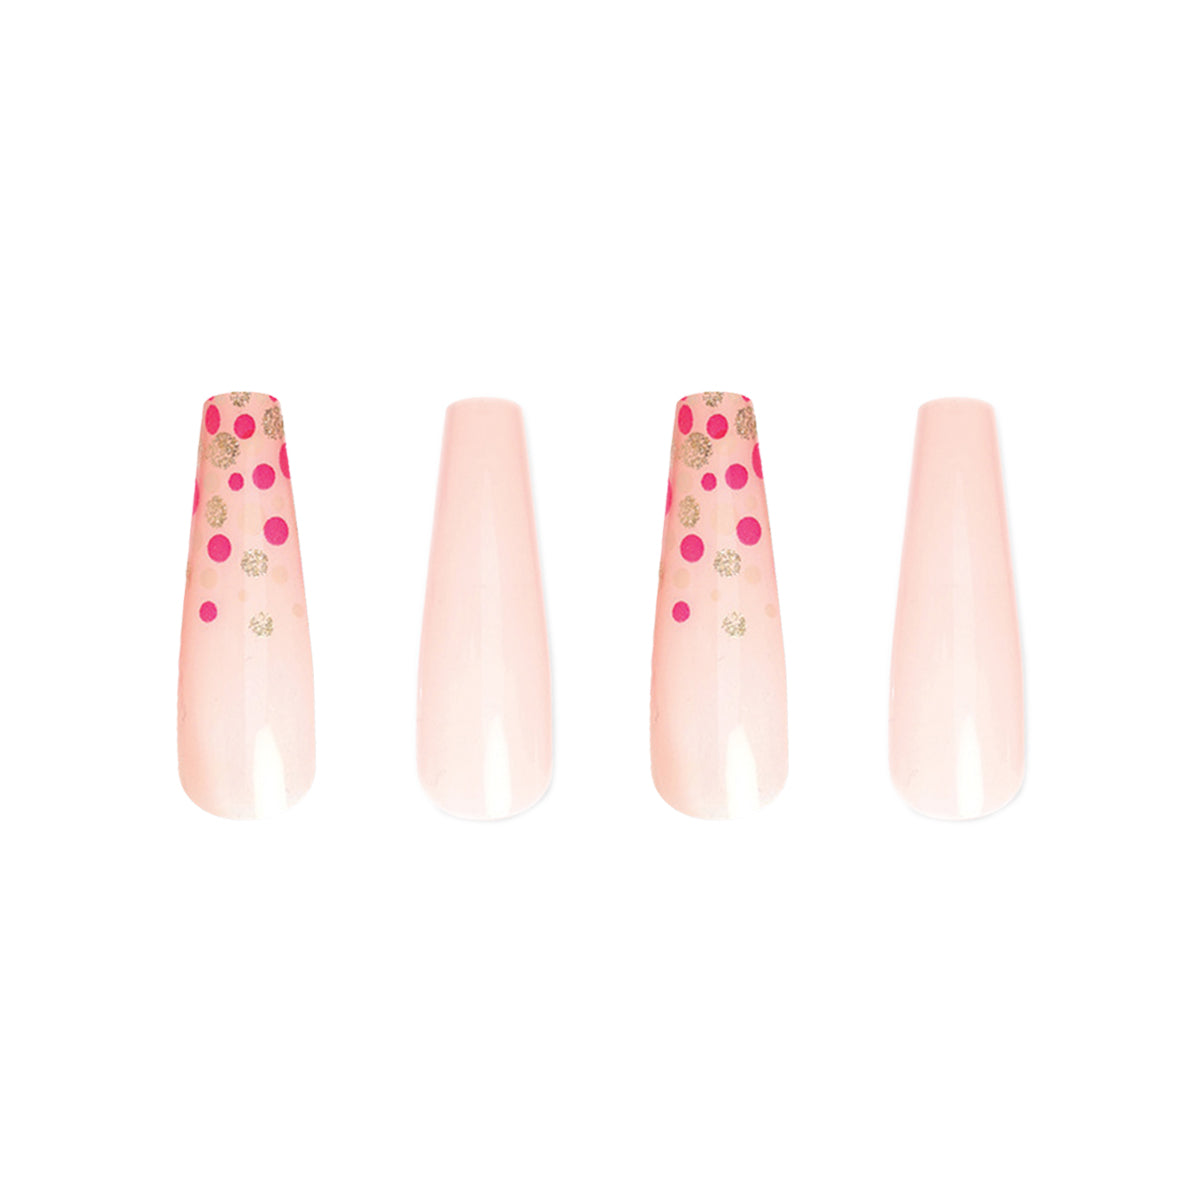 SUGAR POP Nail Lacquer 26 Pink Perfection 10 ml Online in India, Buy at  Best Price from Firstcry.com - 11855576